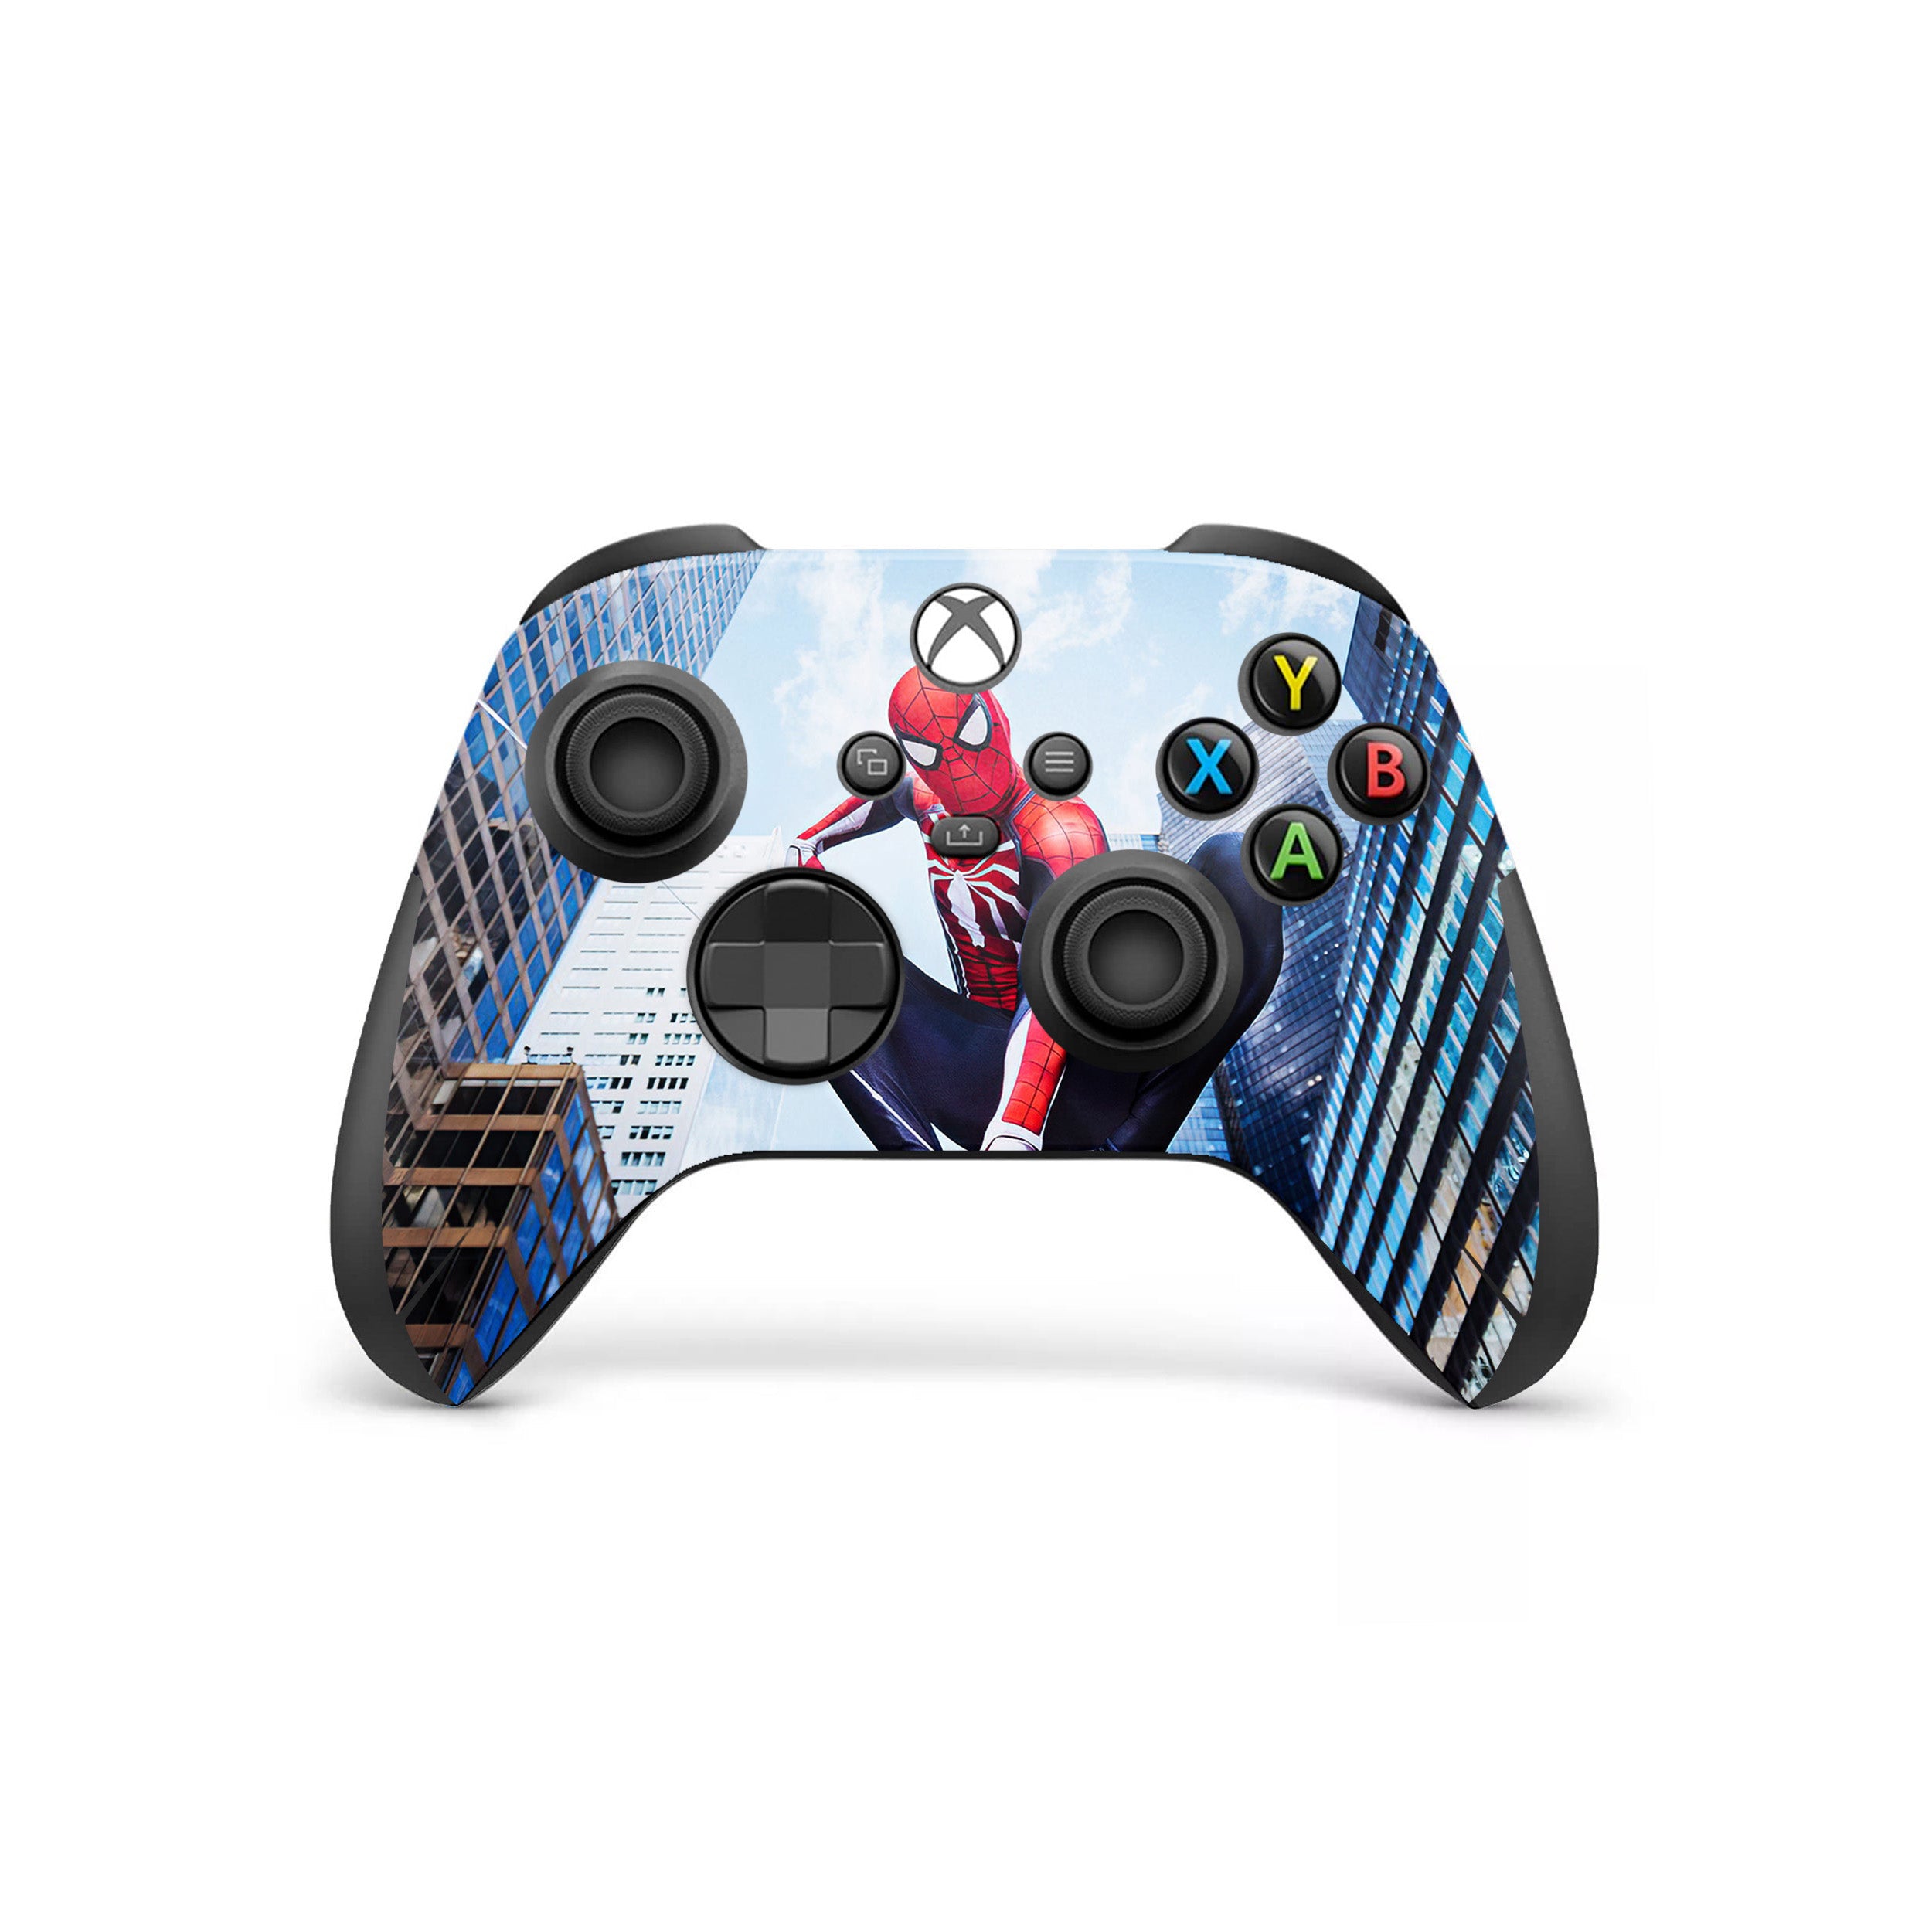 A video game skin featuring a Marvel Comics Spider Man design for the Xbox Wireless Controller.